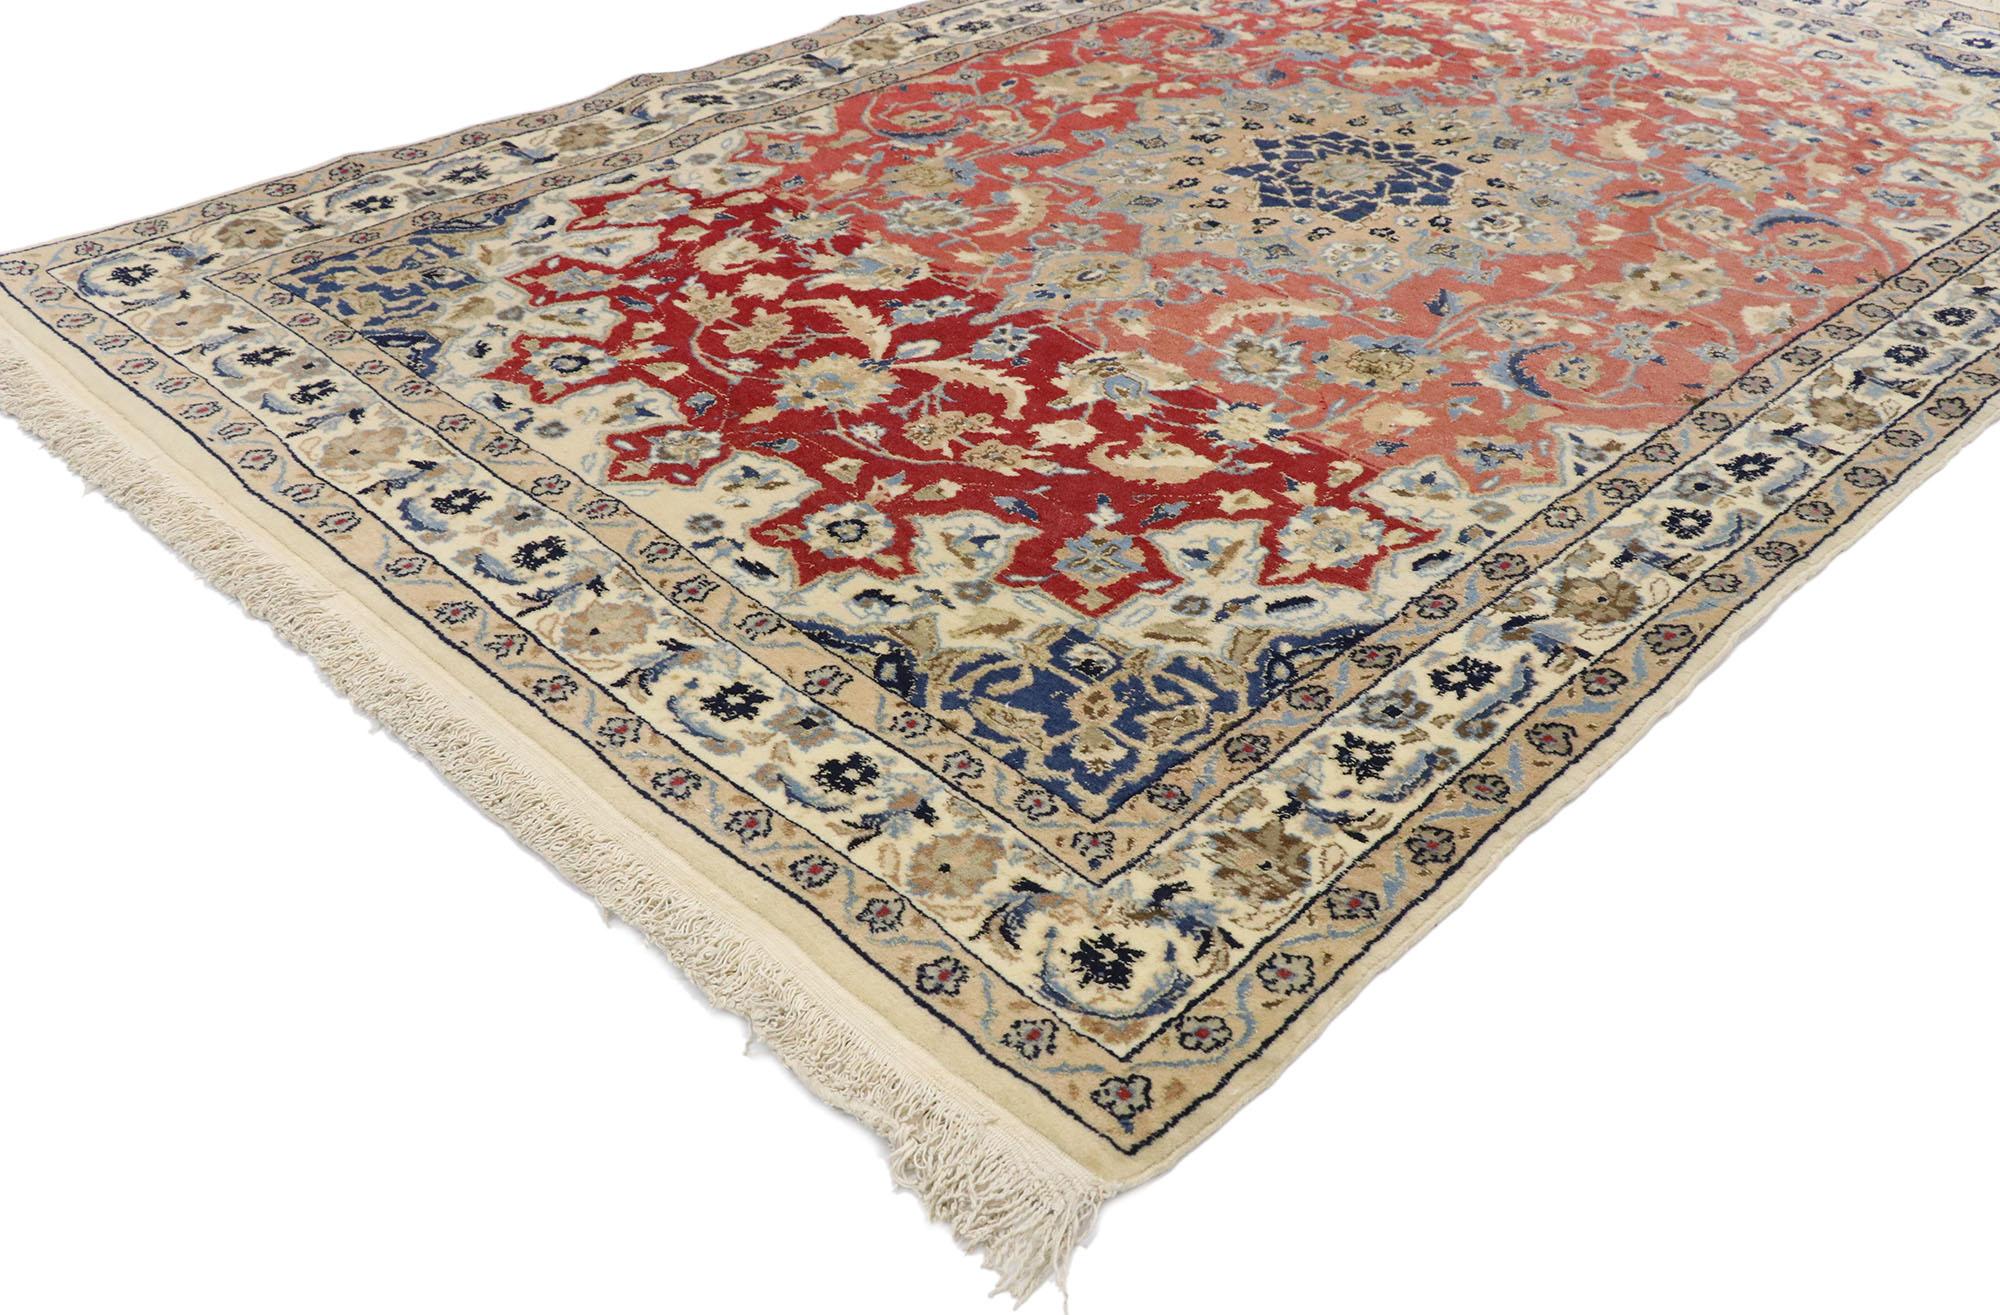 77576, vintage Persian Nain rug with New England Cape Cod Federal style. With a timeless design and defining colors, evoke the charming New England Cape Cod style with this hand knotted wool and silk vintage Persian Nain rug. Taking center stage is